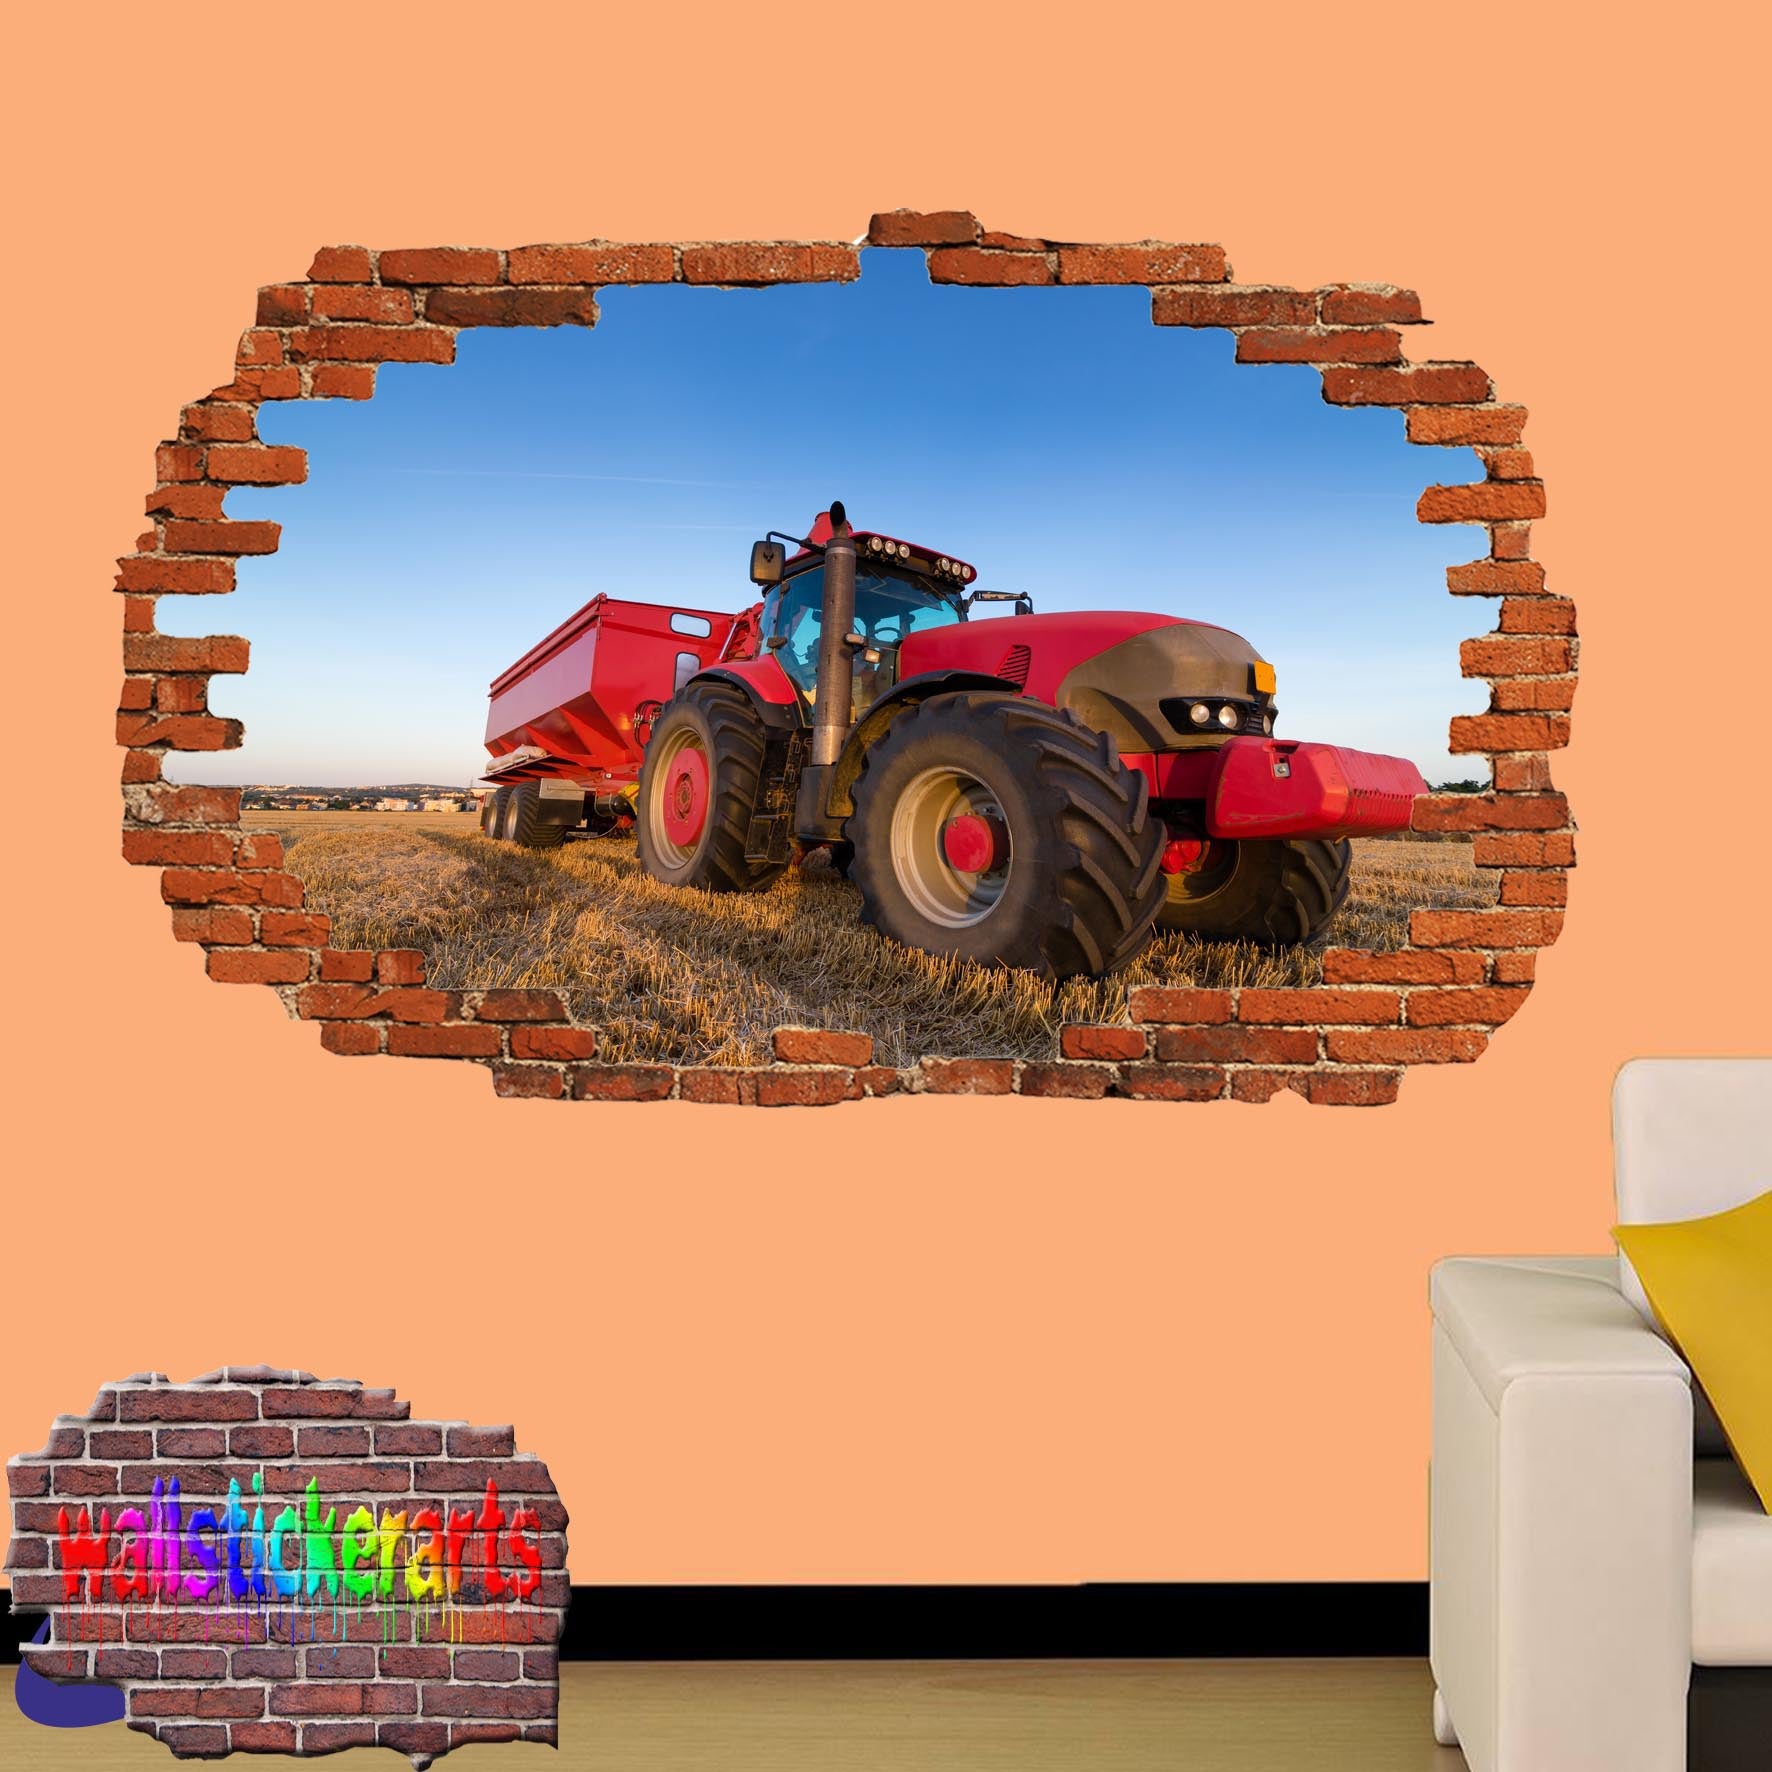 TRACTOR PLOUGH AGRICULTURAL FARMING TOOLS POSTER WALL STICKER